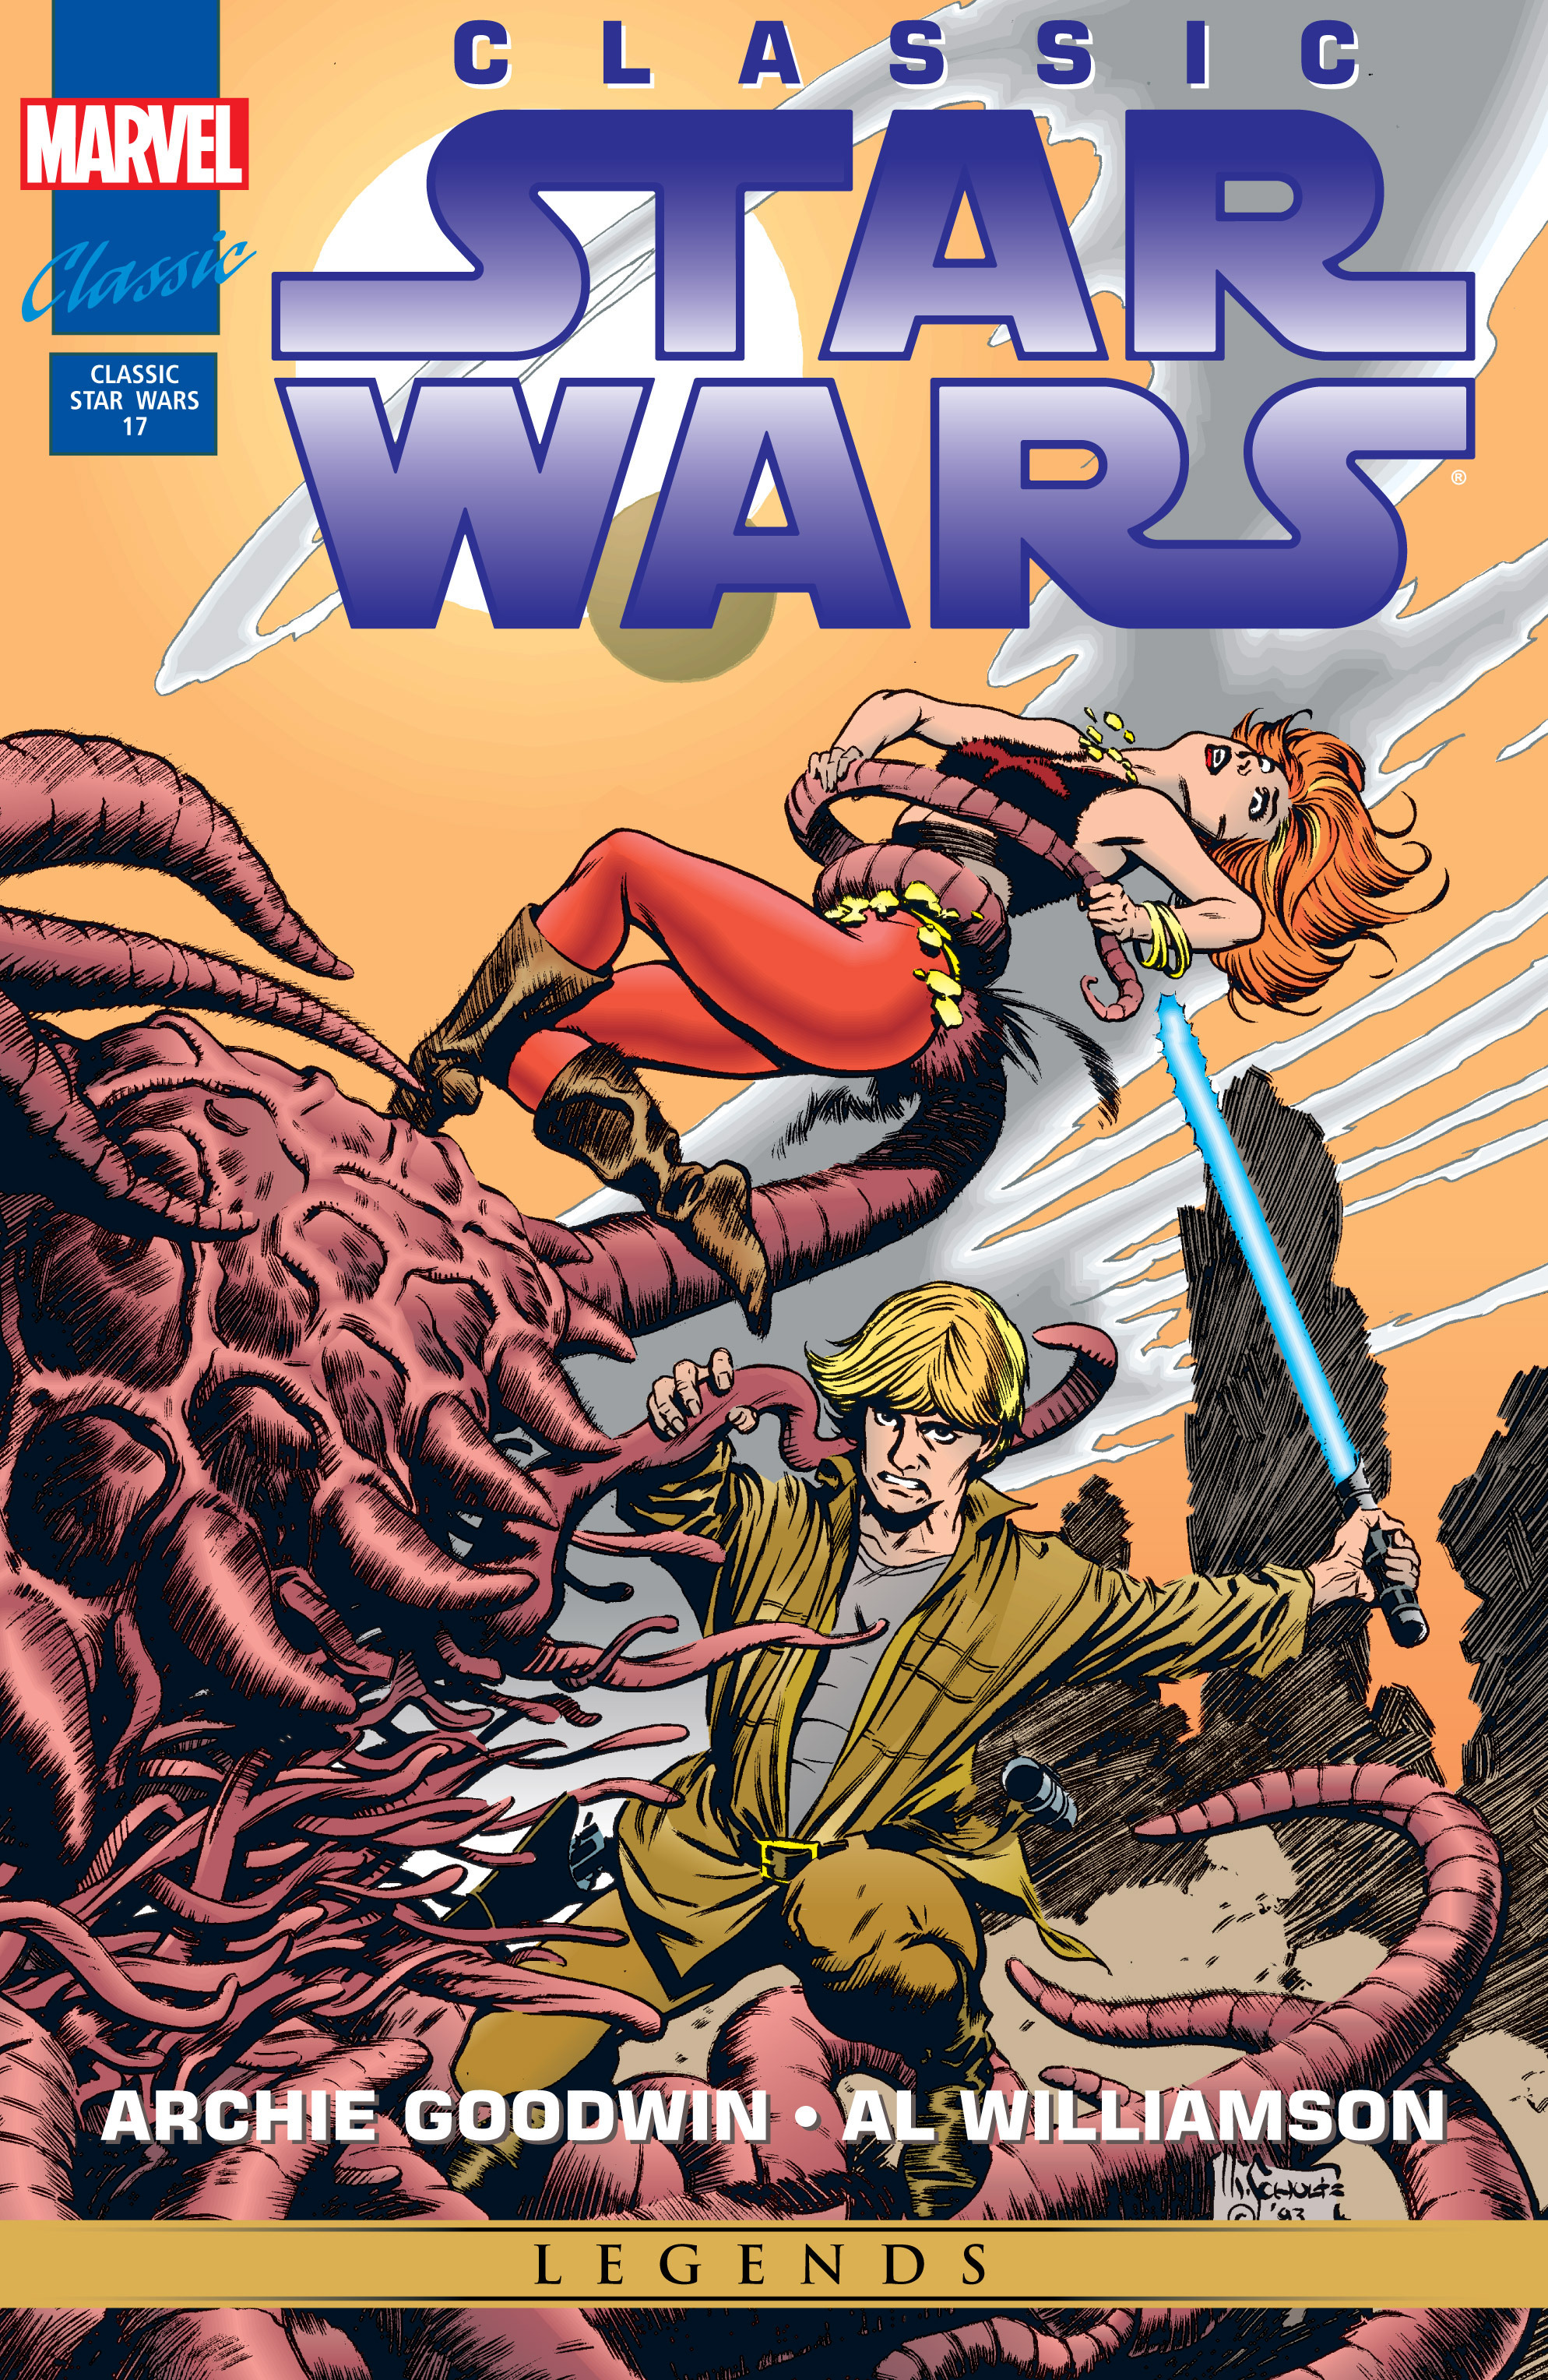 Read online Classic Star Wars comic -  Issue #17 - 1